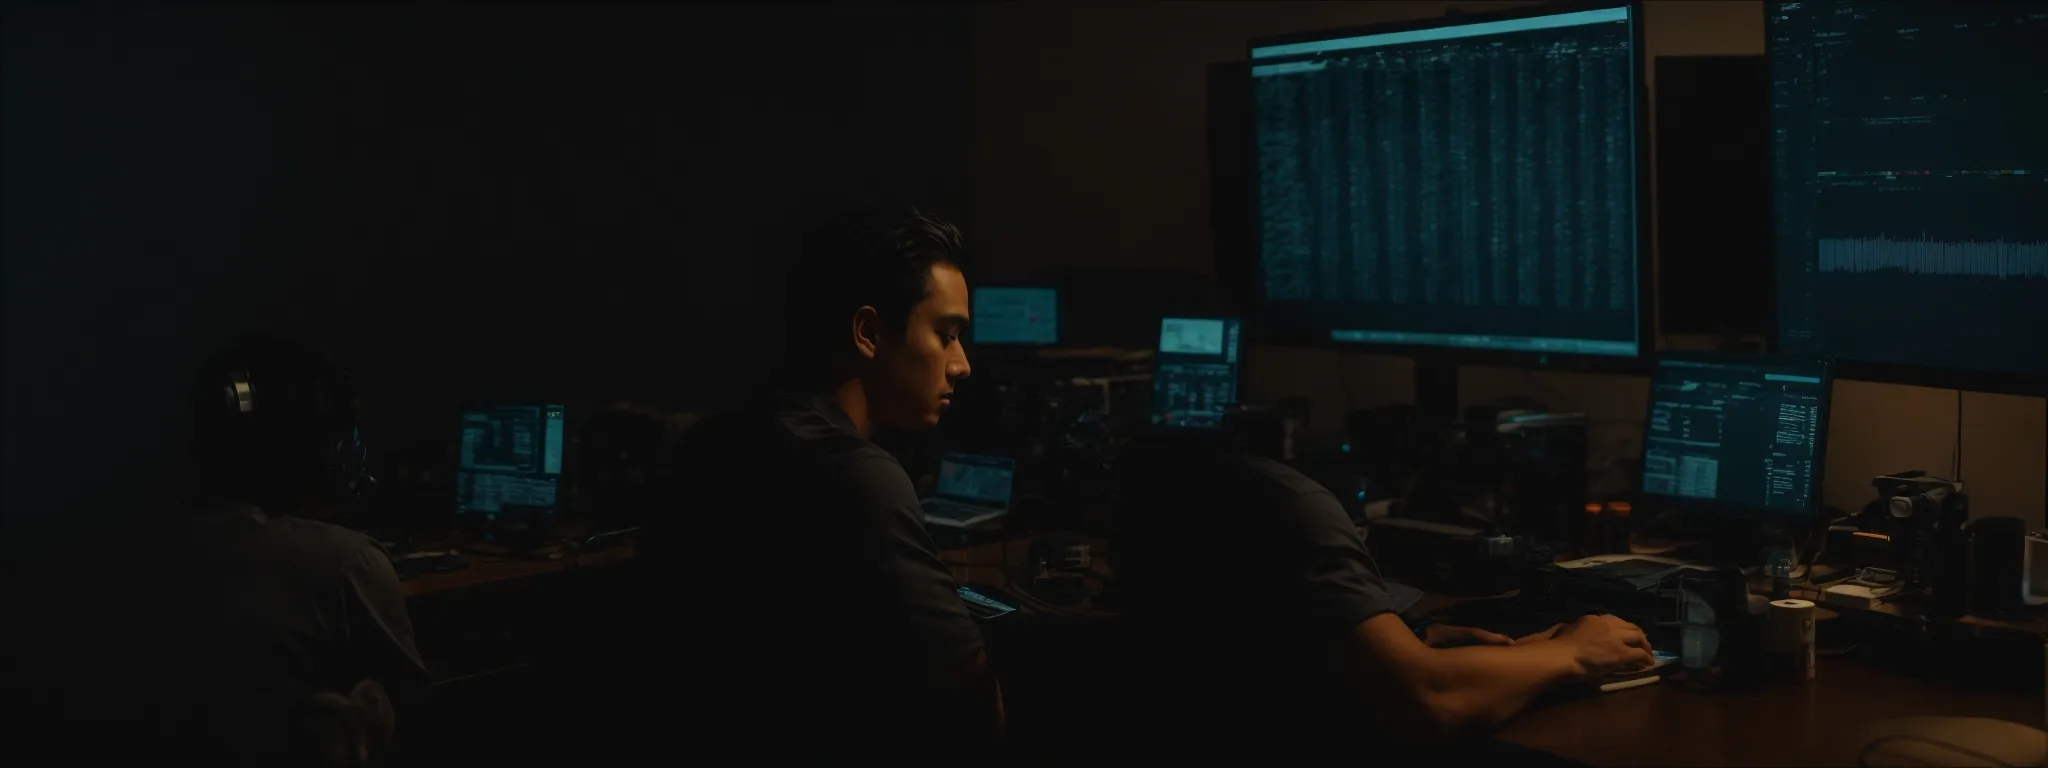 a filmmaker sits before a computer screen, editing software open with a timeline of clips visible in a dimly lit room.